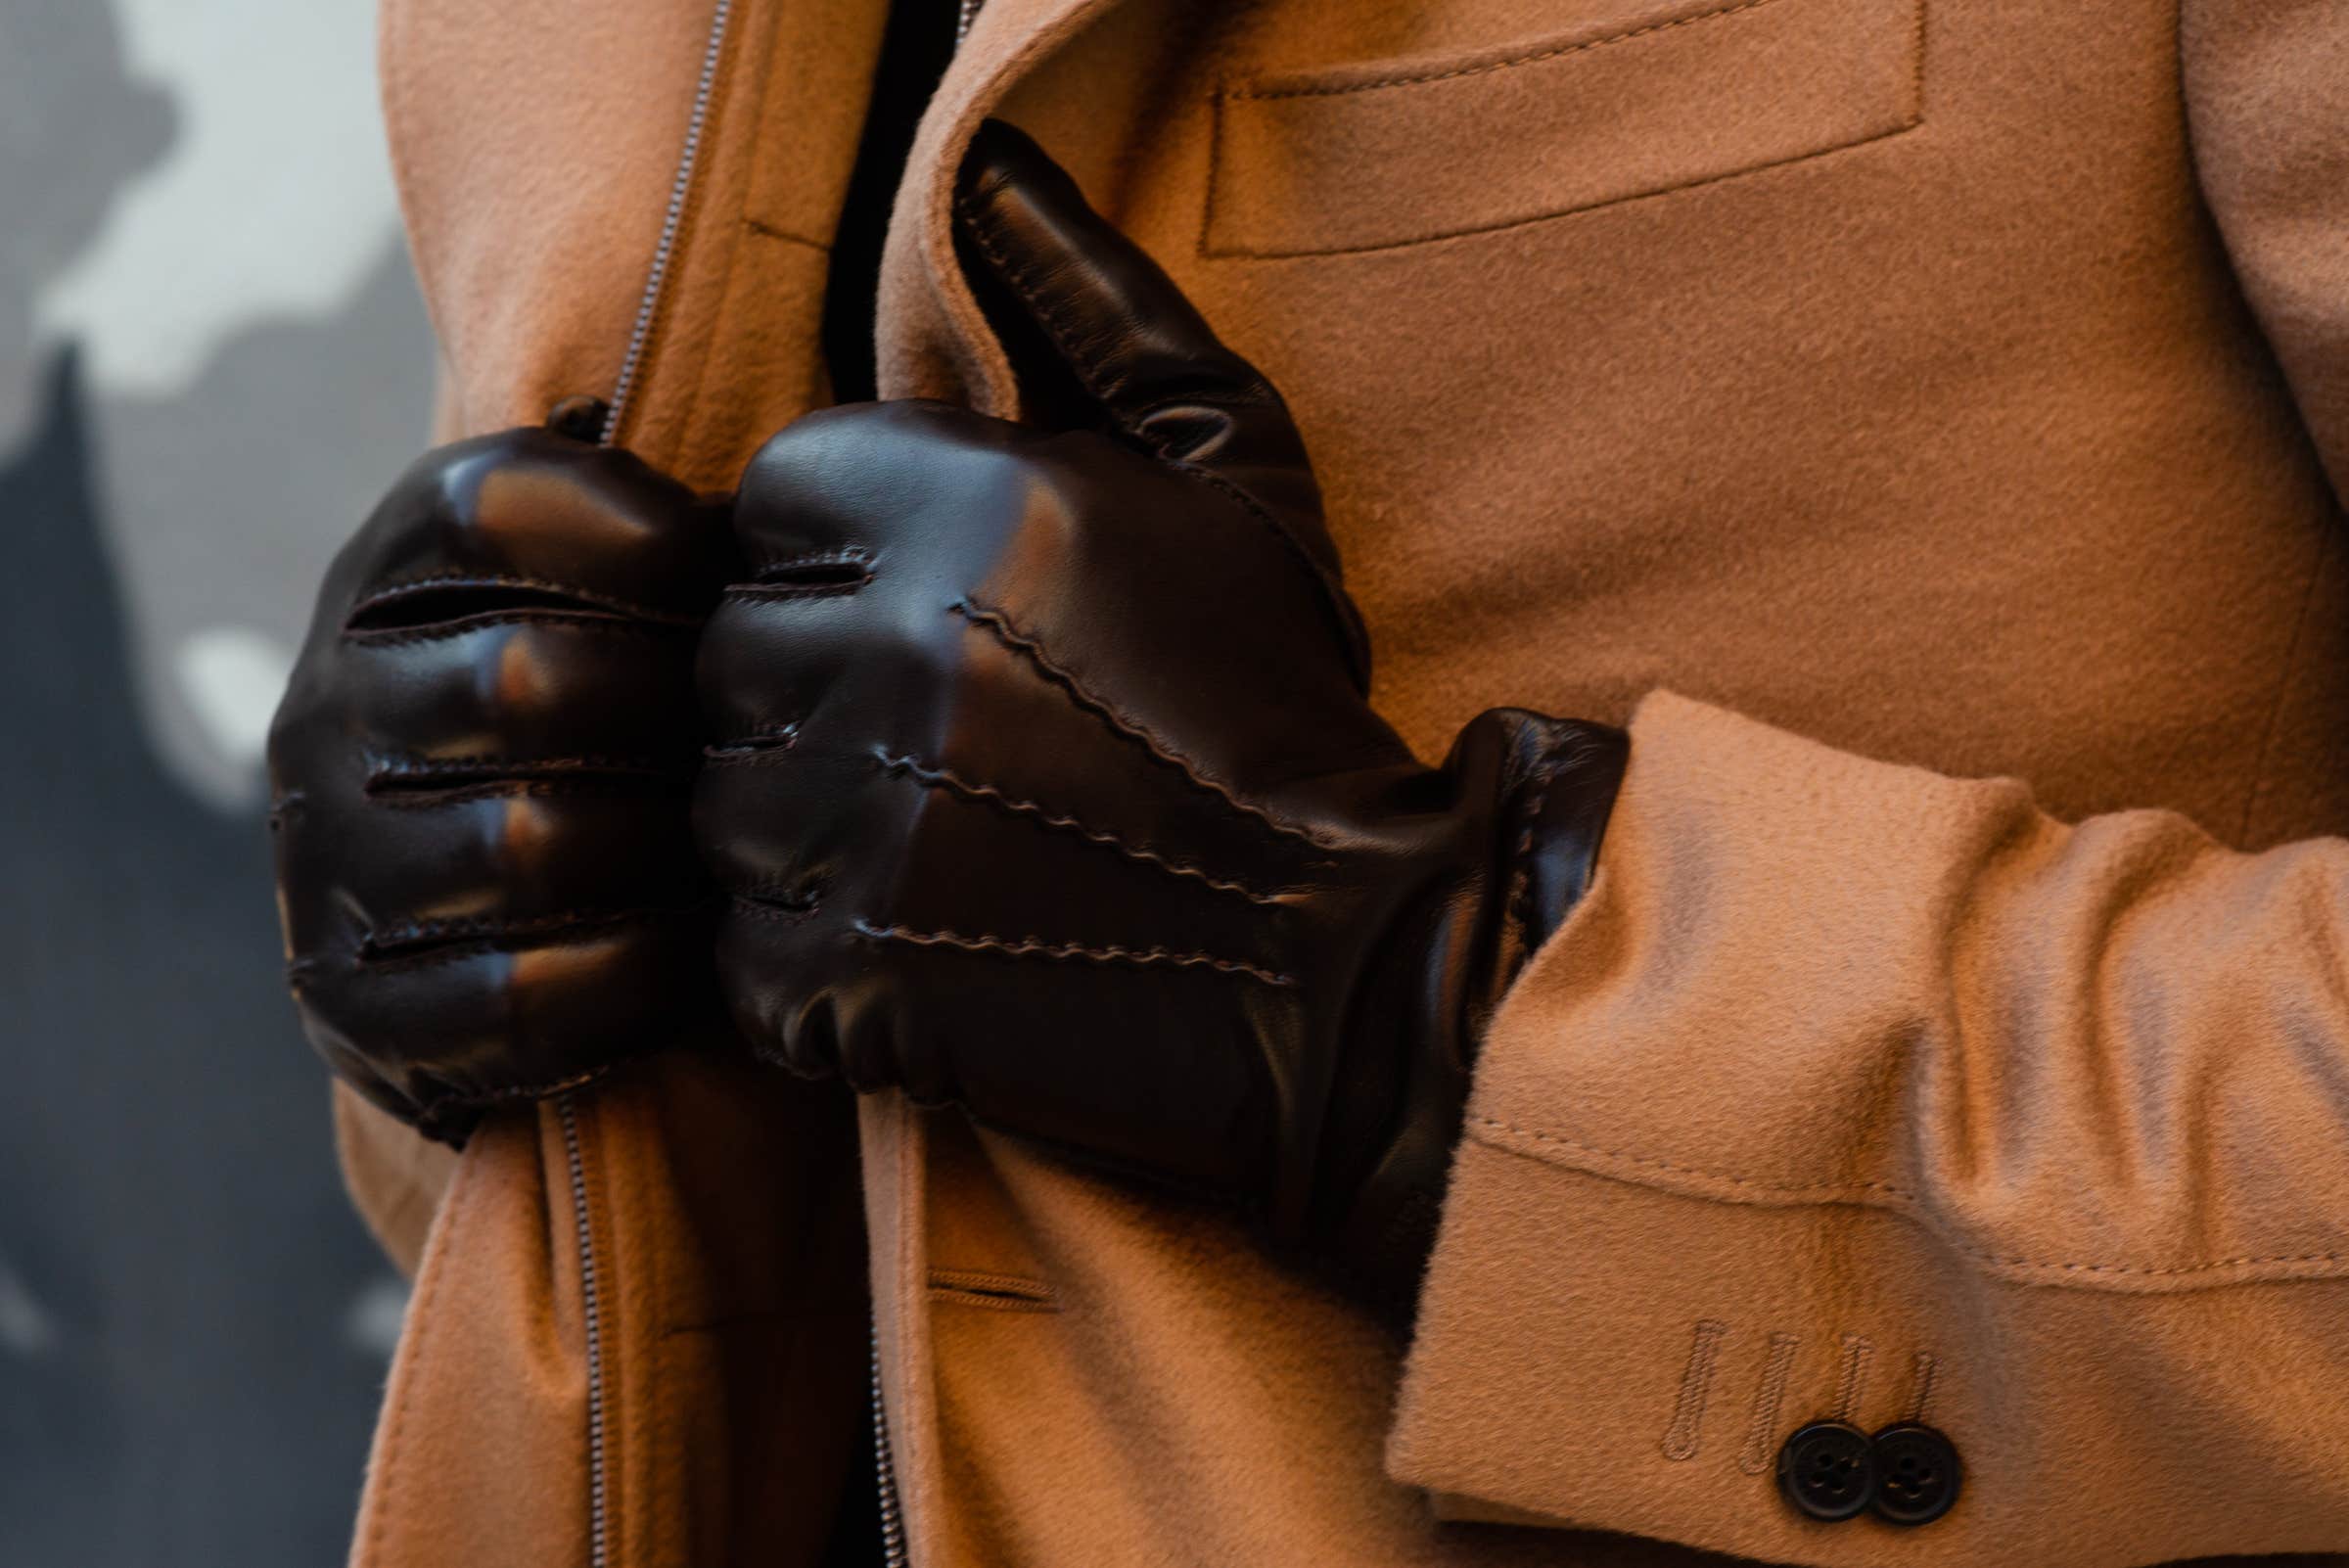 Expert Tips for Leather Glove Fixing Stitches, Leather Repair, and